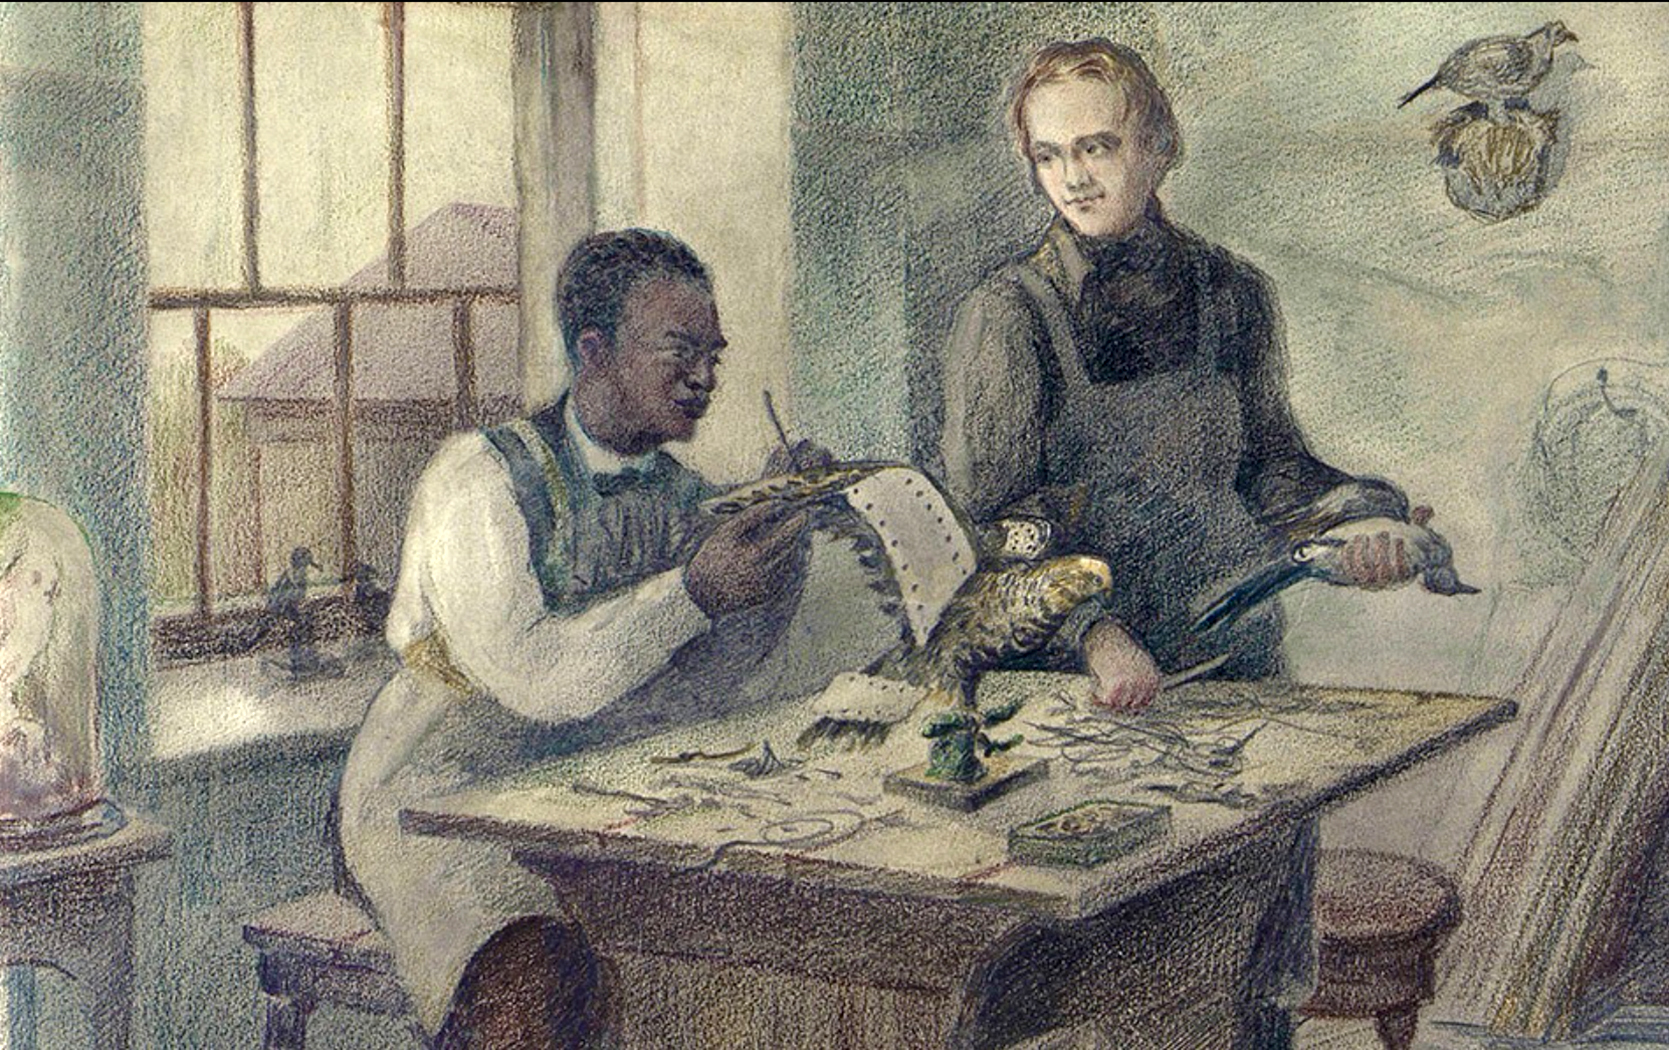 Painting of John Edmonstone and Charles Darwin performing taxidermy in a workshop surrounded by other prepared birds